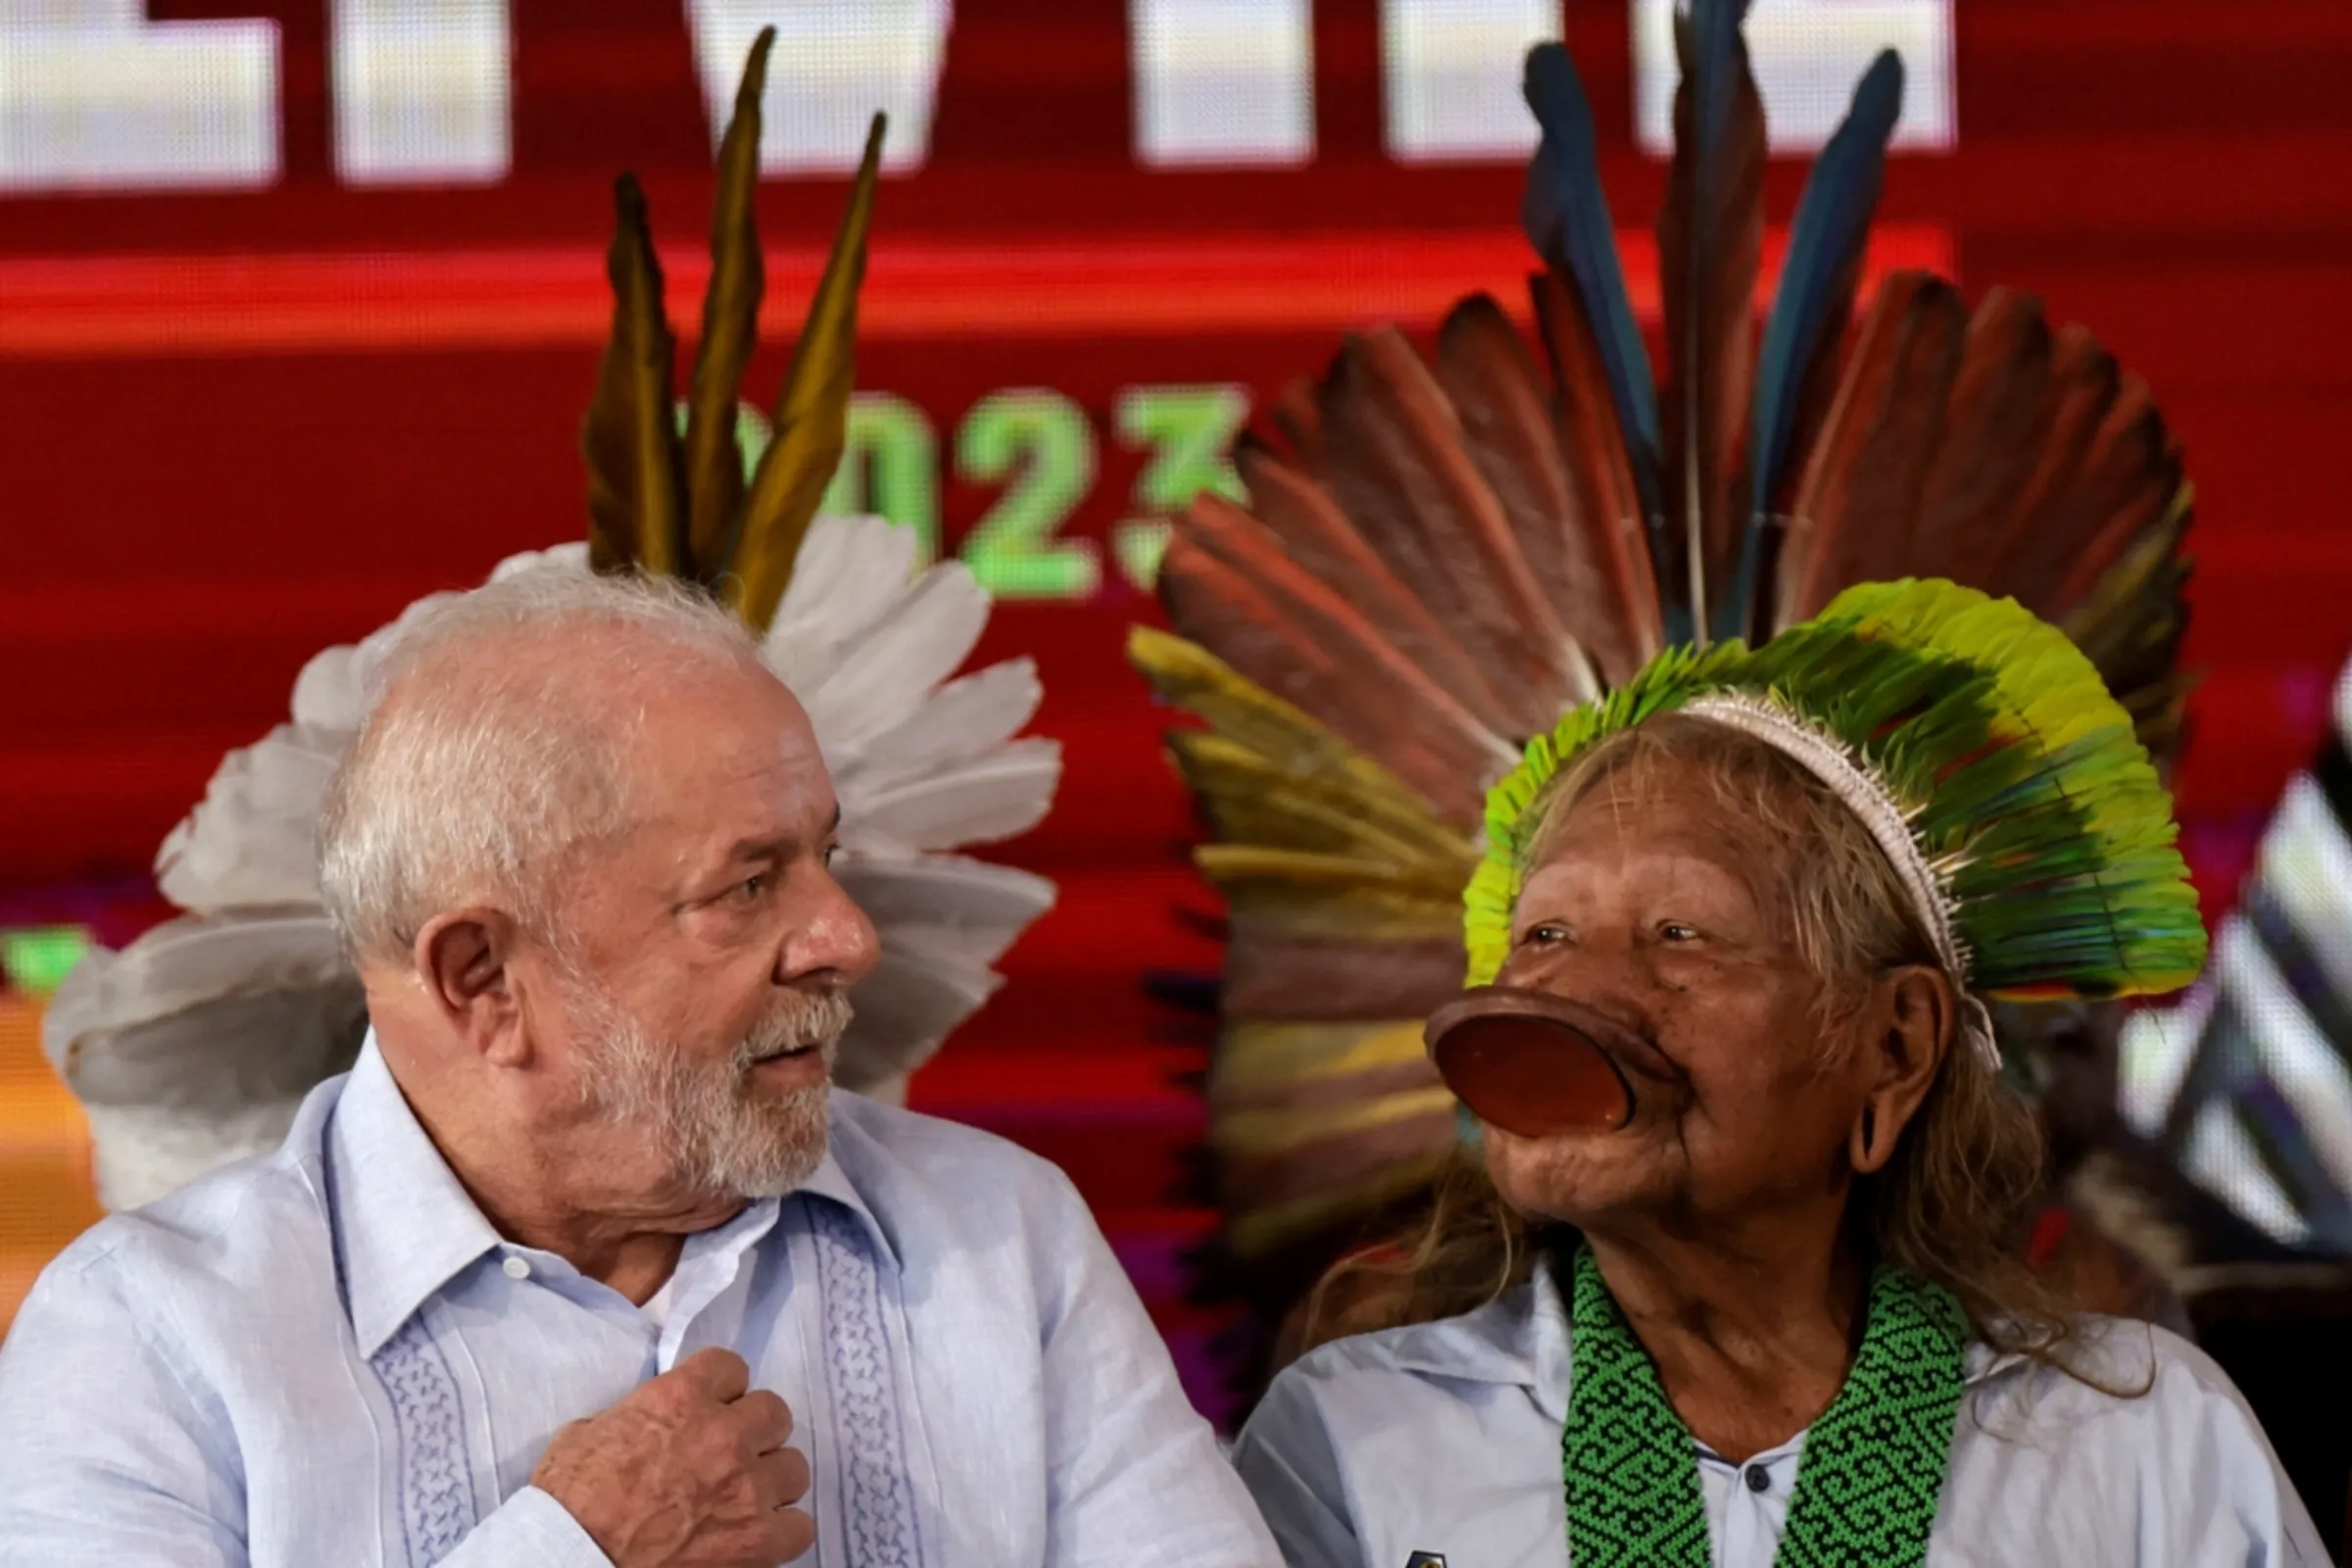 Brazil's President Luiz Inacio Lula da Silva talks with Brazil's indigenous chief Raoni Metuktire, during the closing of the Terra Livre (Free Land) camp, a protest camp to demand the demarcation of land and to defend cultural rights, in Brasilia, Brazil April 28, 2023